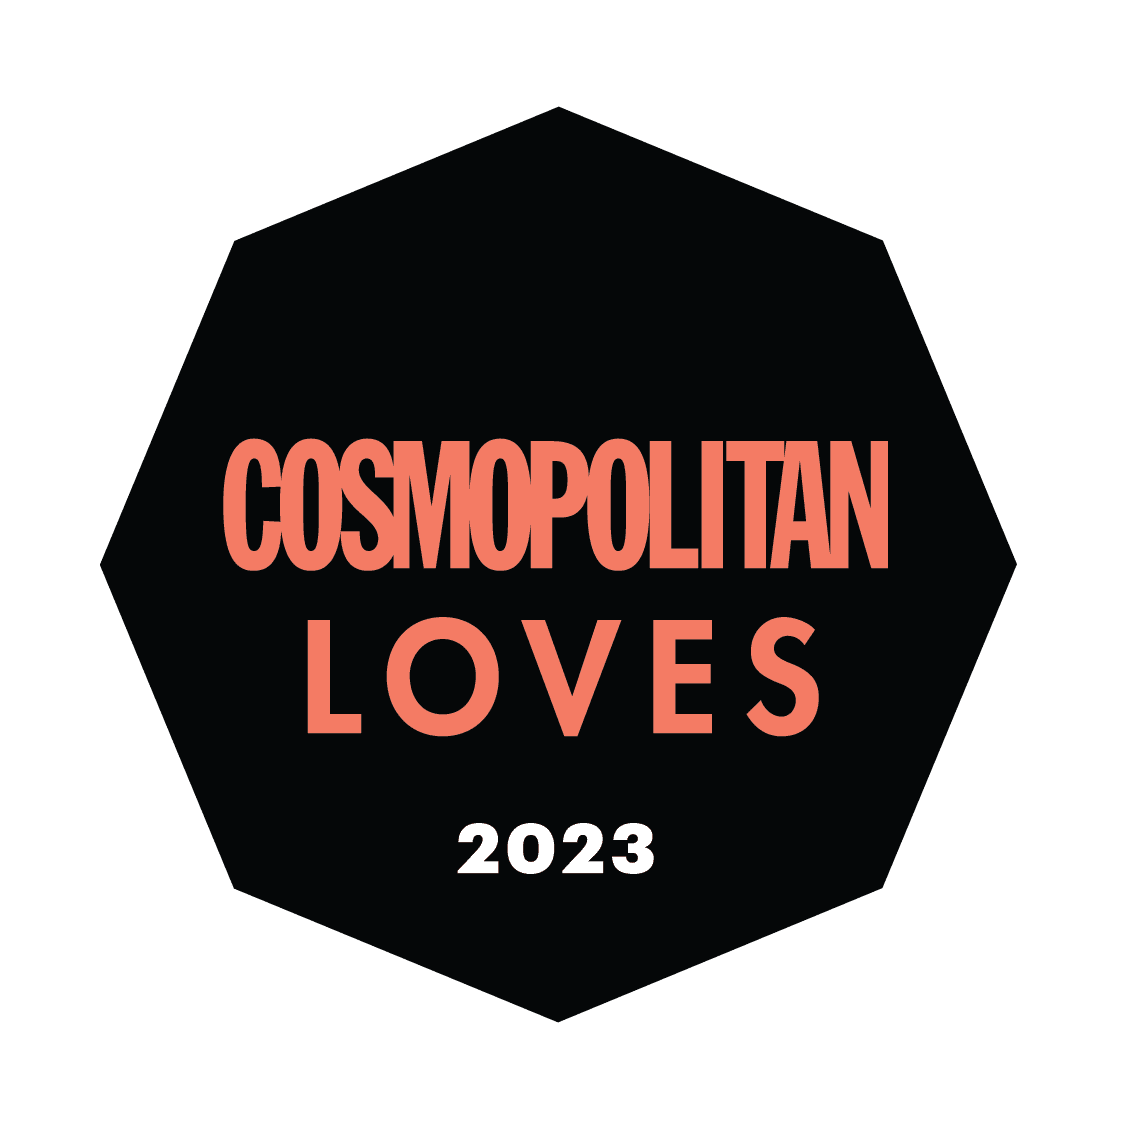 Cosmo loves 2023